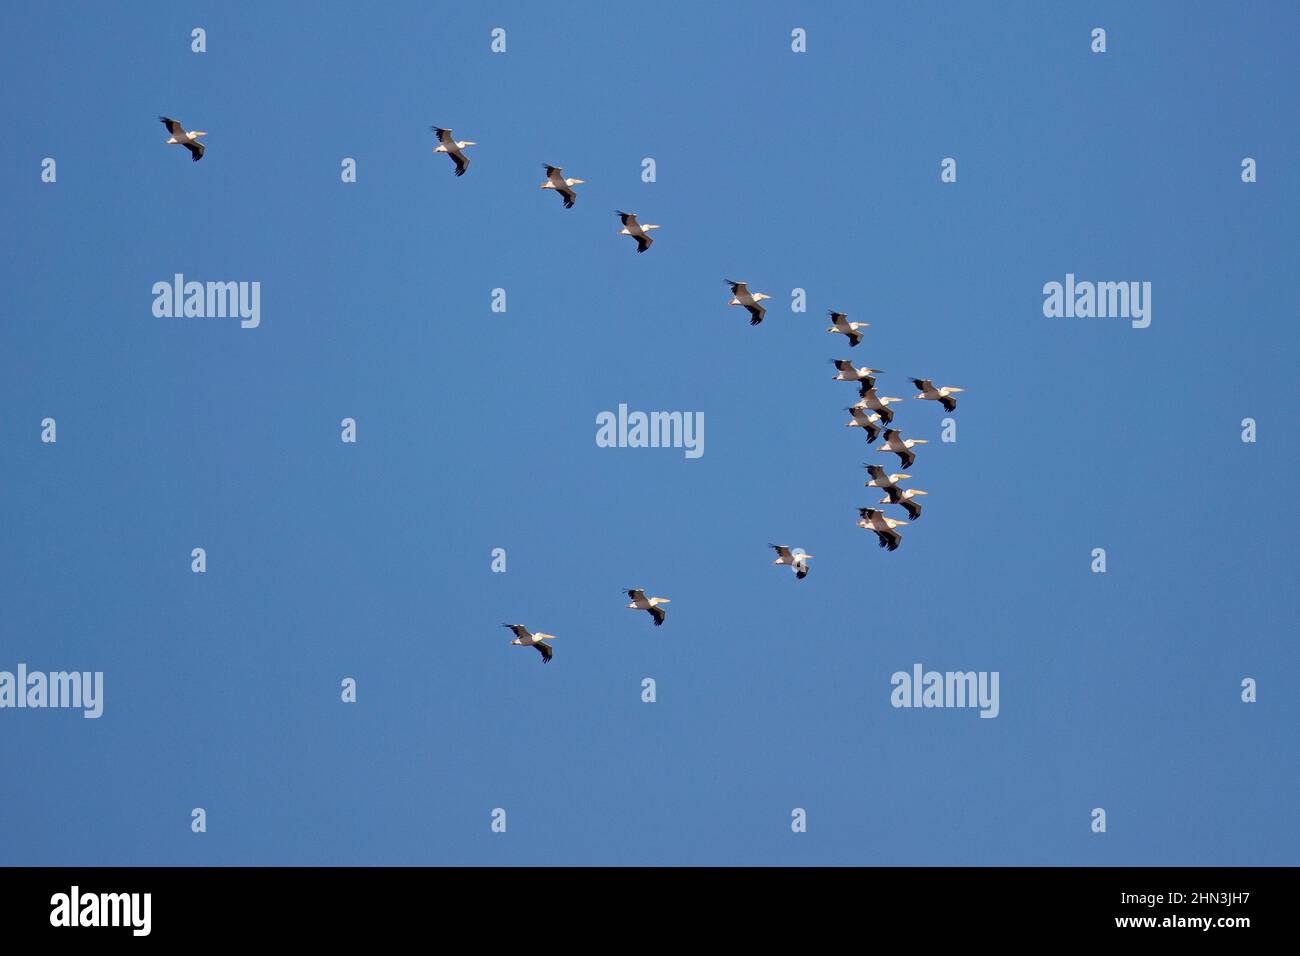 Flock of Great White Pelicans flying in blue sky over the Hula Valley, a major flyway for bird migration between Europe, Asia & Africa Stock Photo